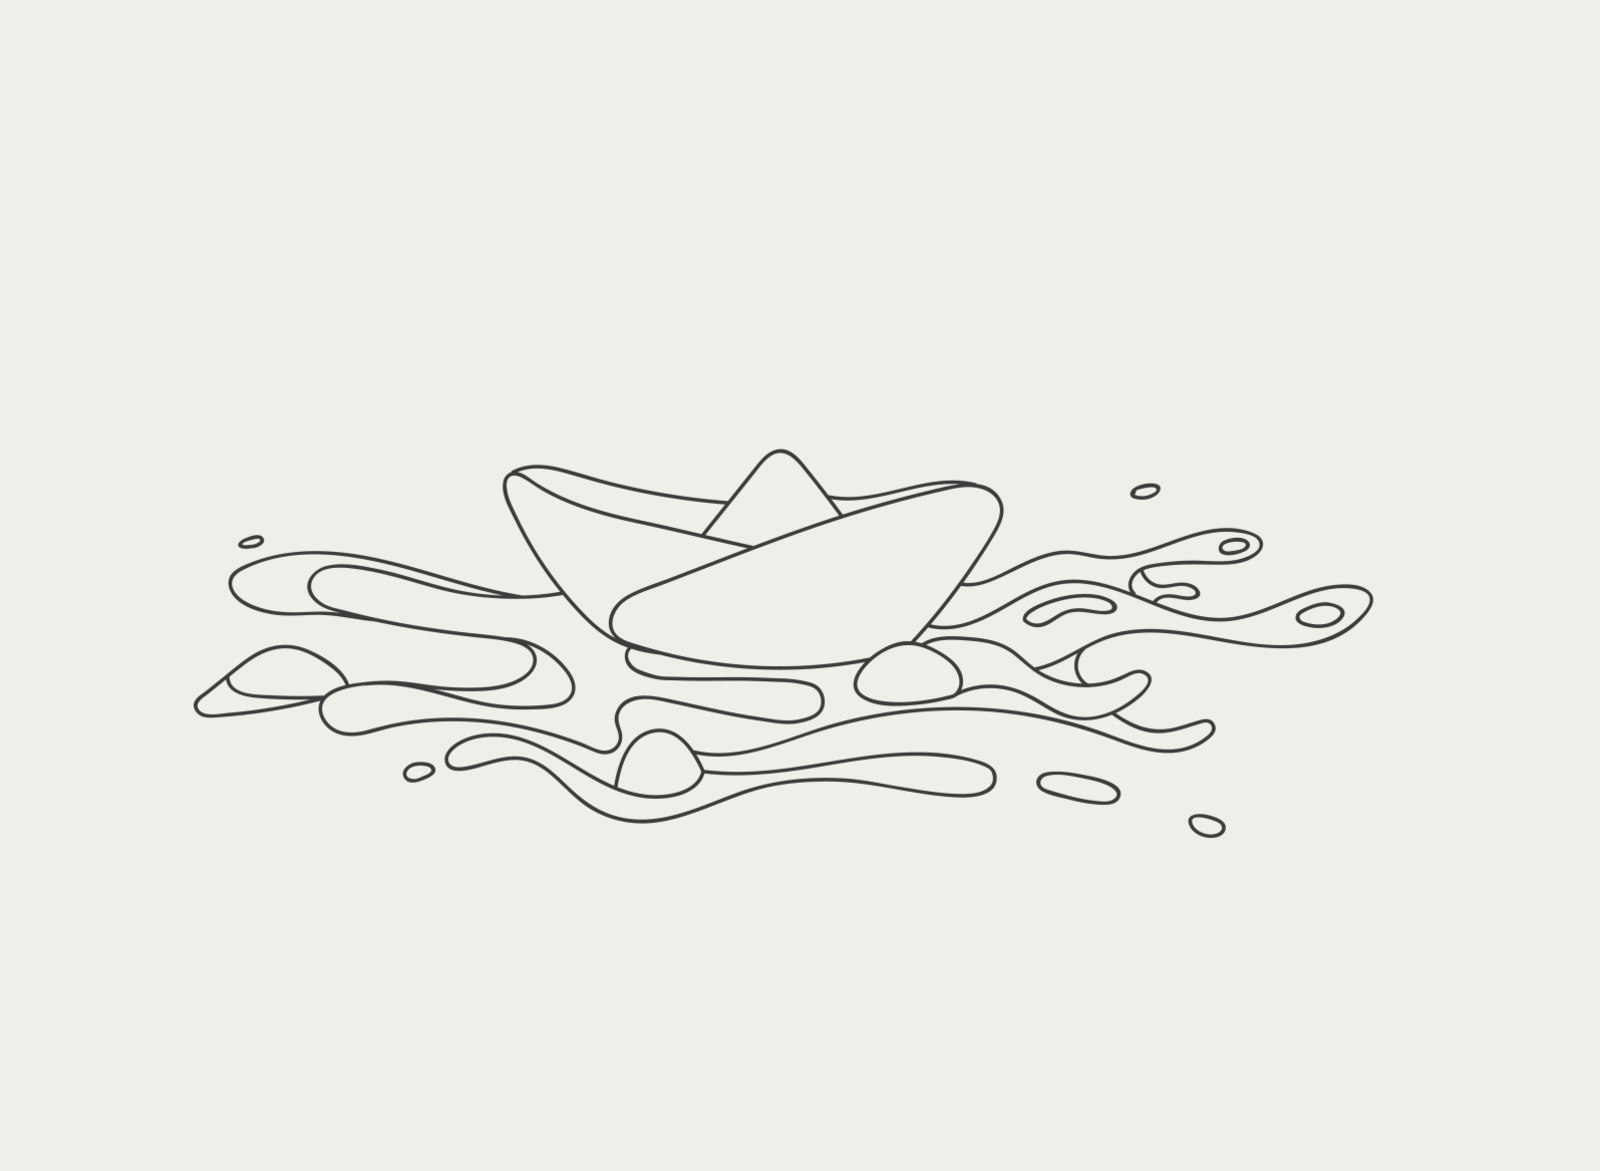 Flow River Flow by Victor Rigo on Dribbble